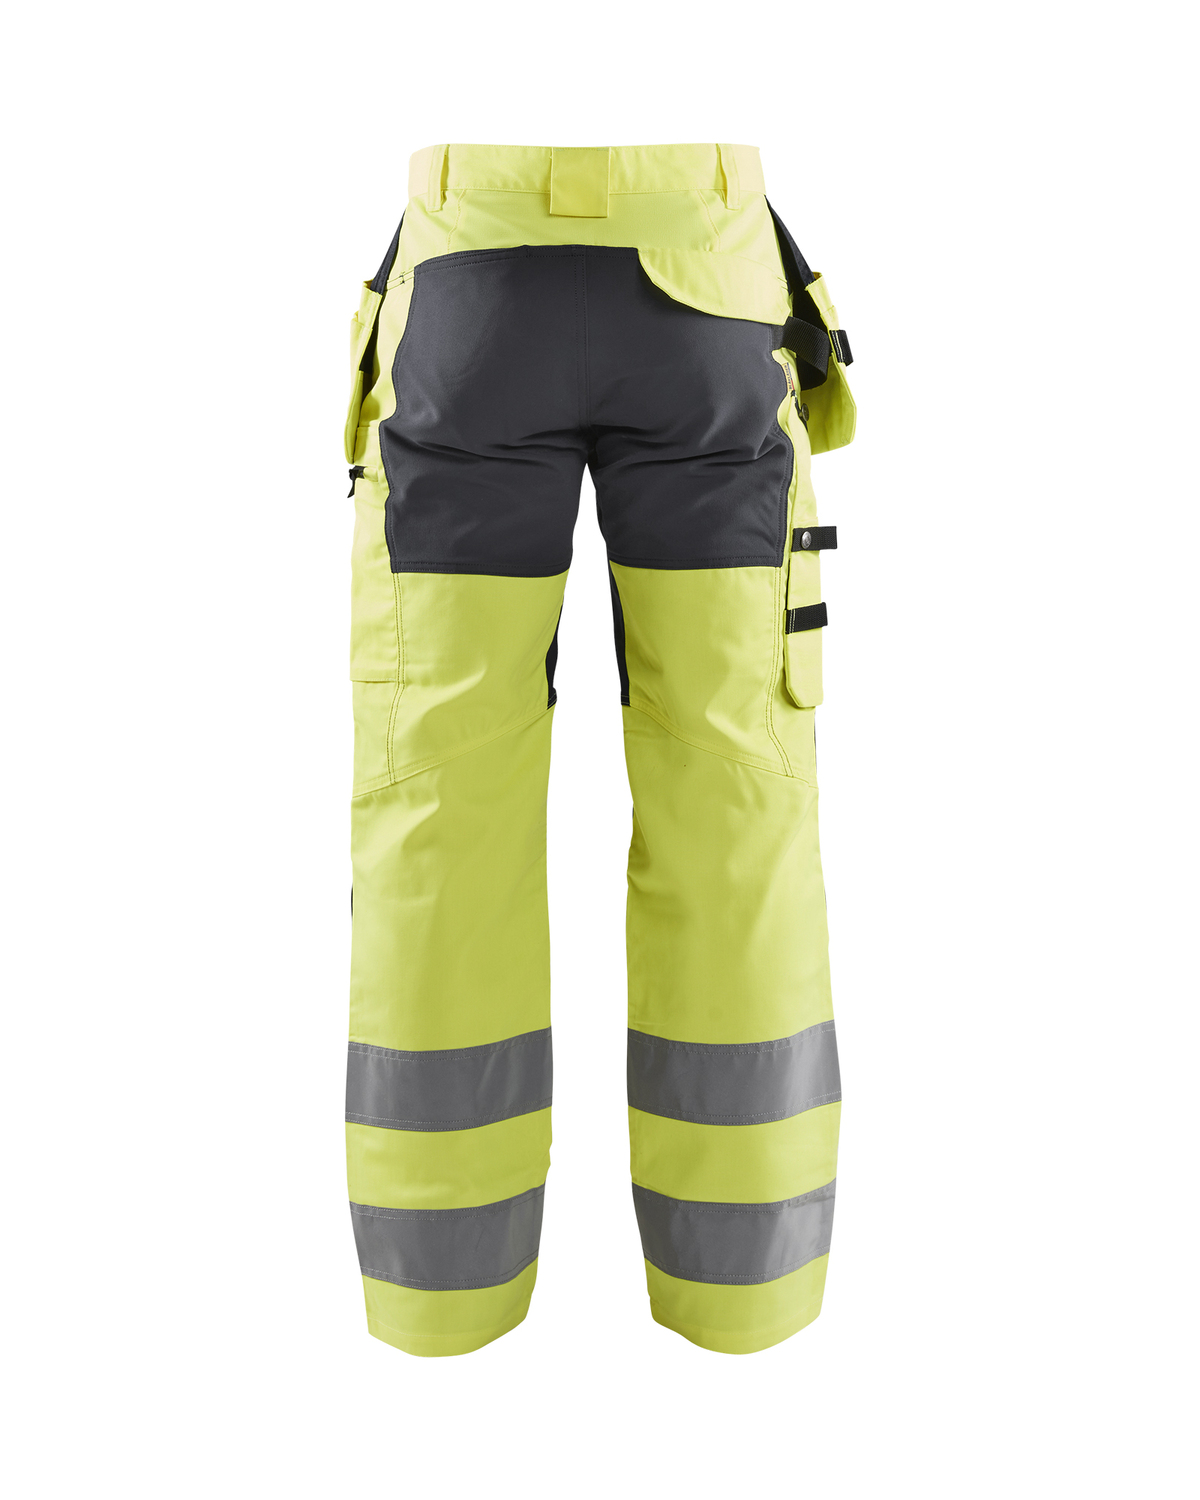 High Visibiltiy Waterproof Trousers AllroundWork 6530 HI-VIS CL 2 Snickers  | STOP SA